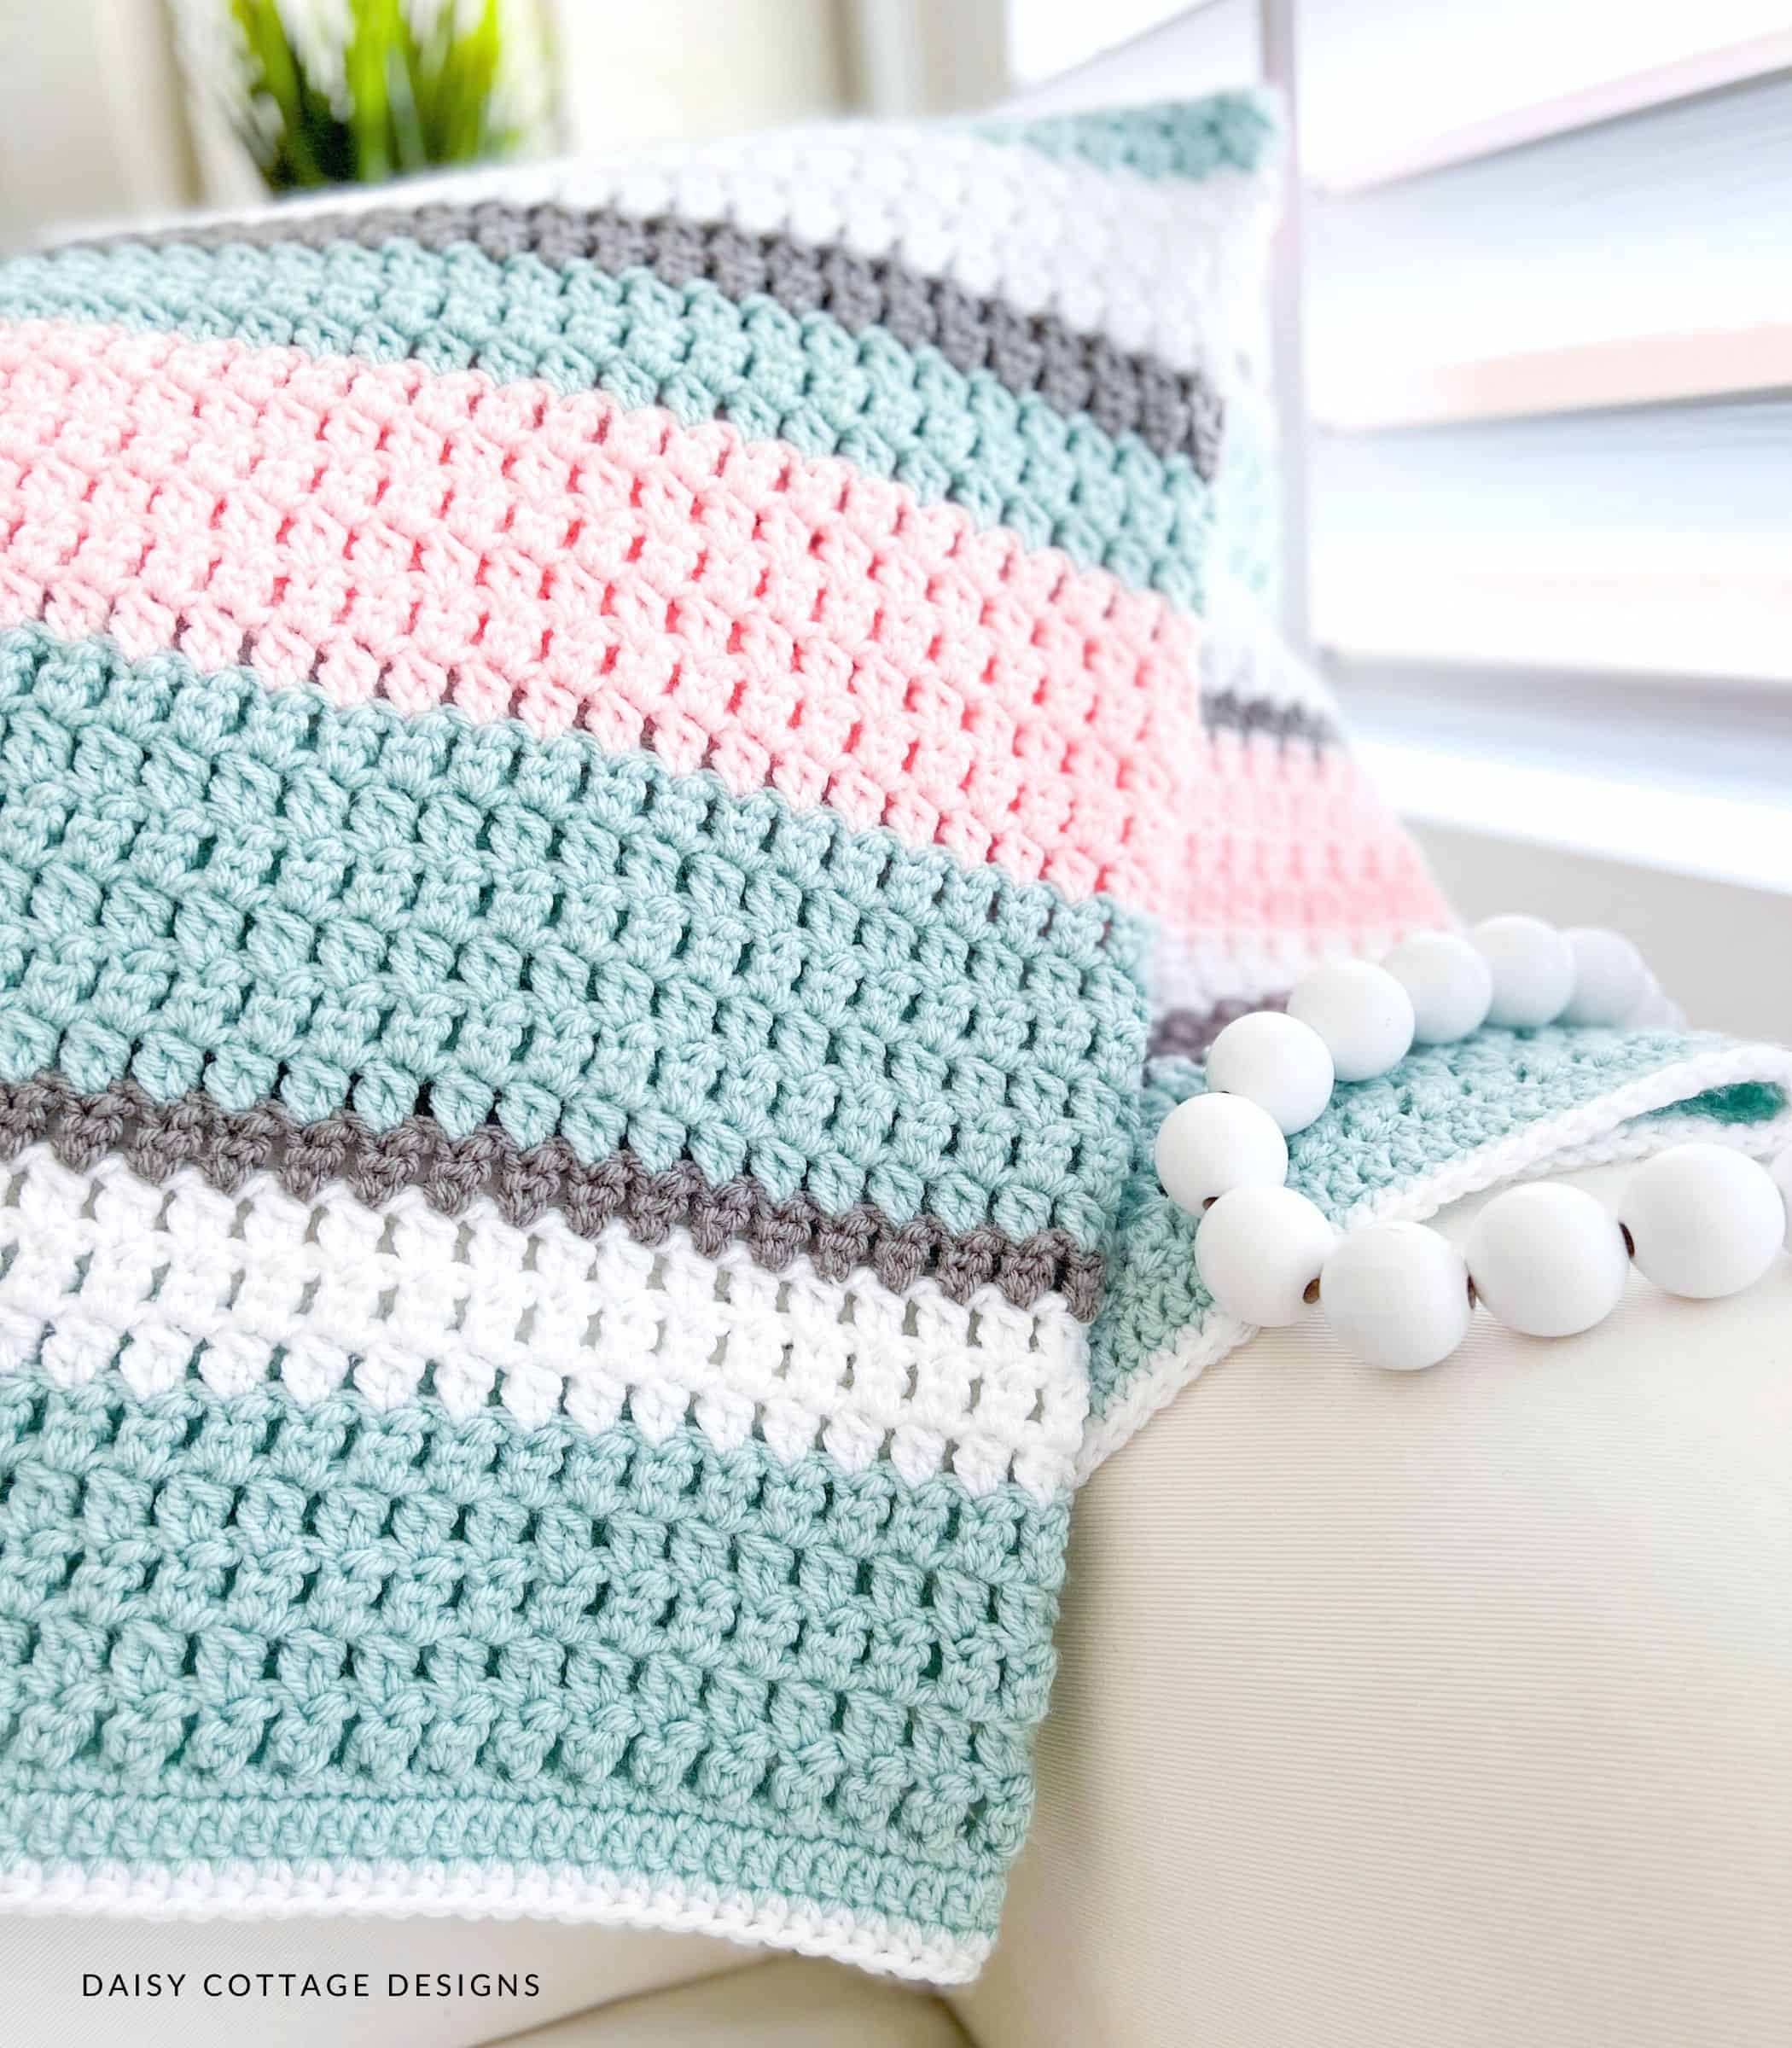 Crochet blanket on a couch